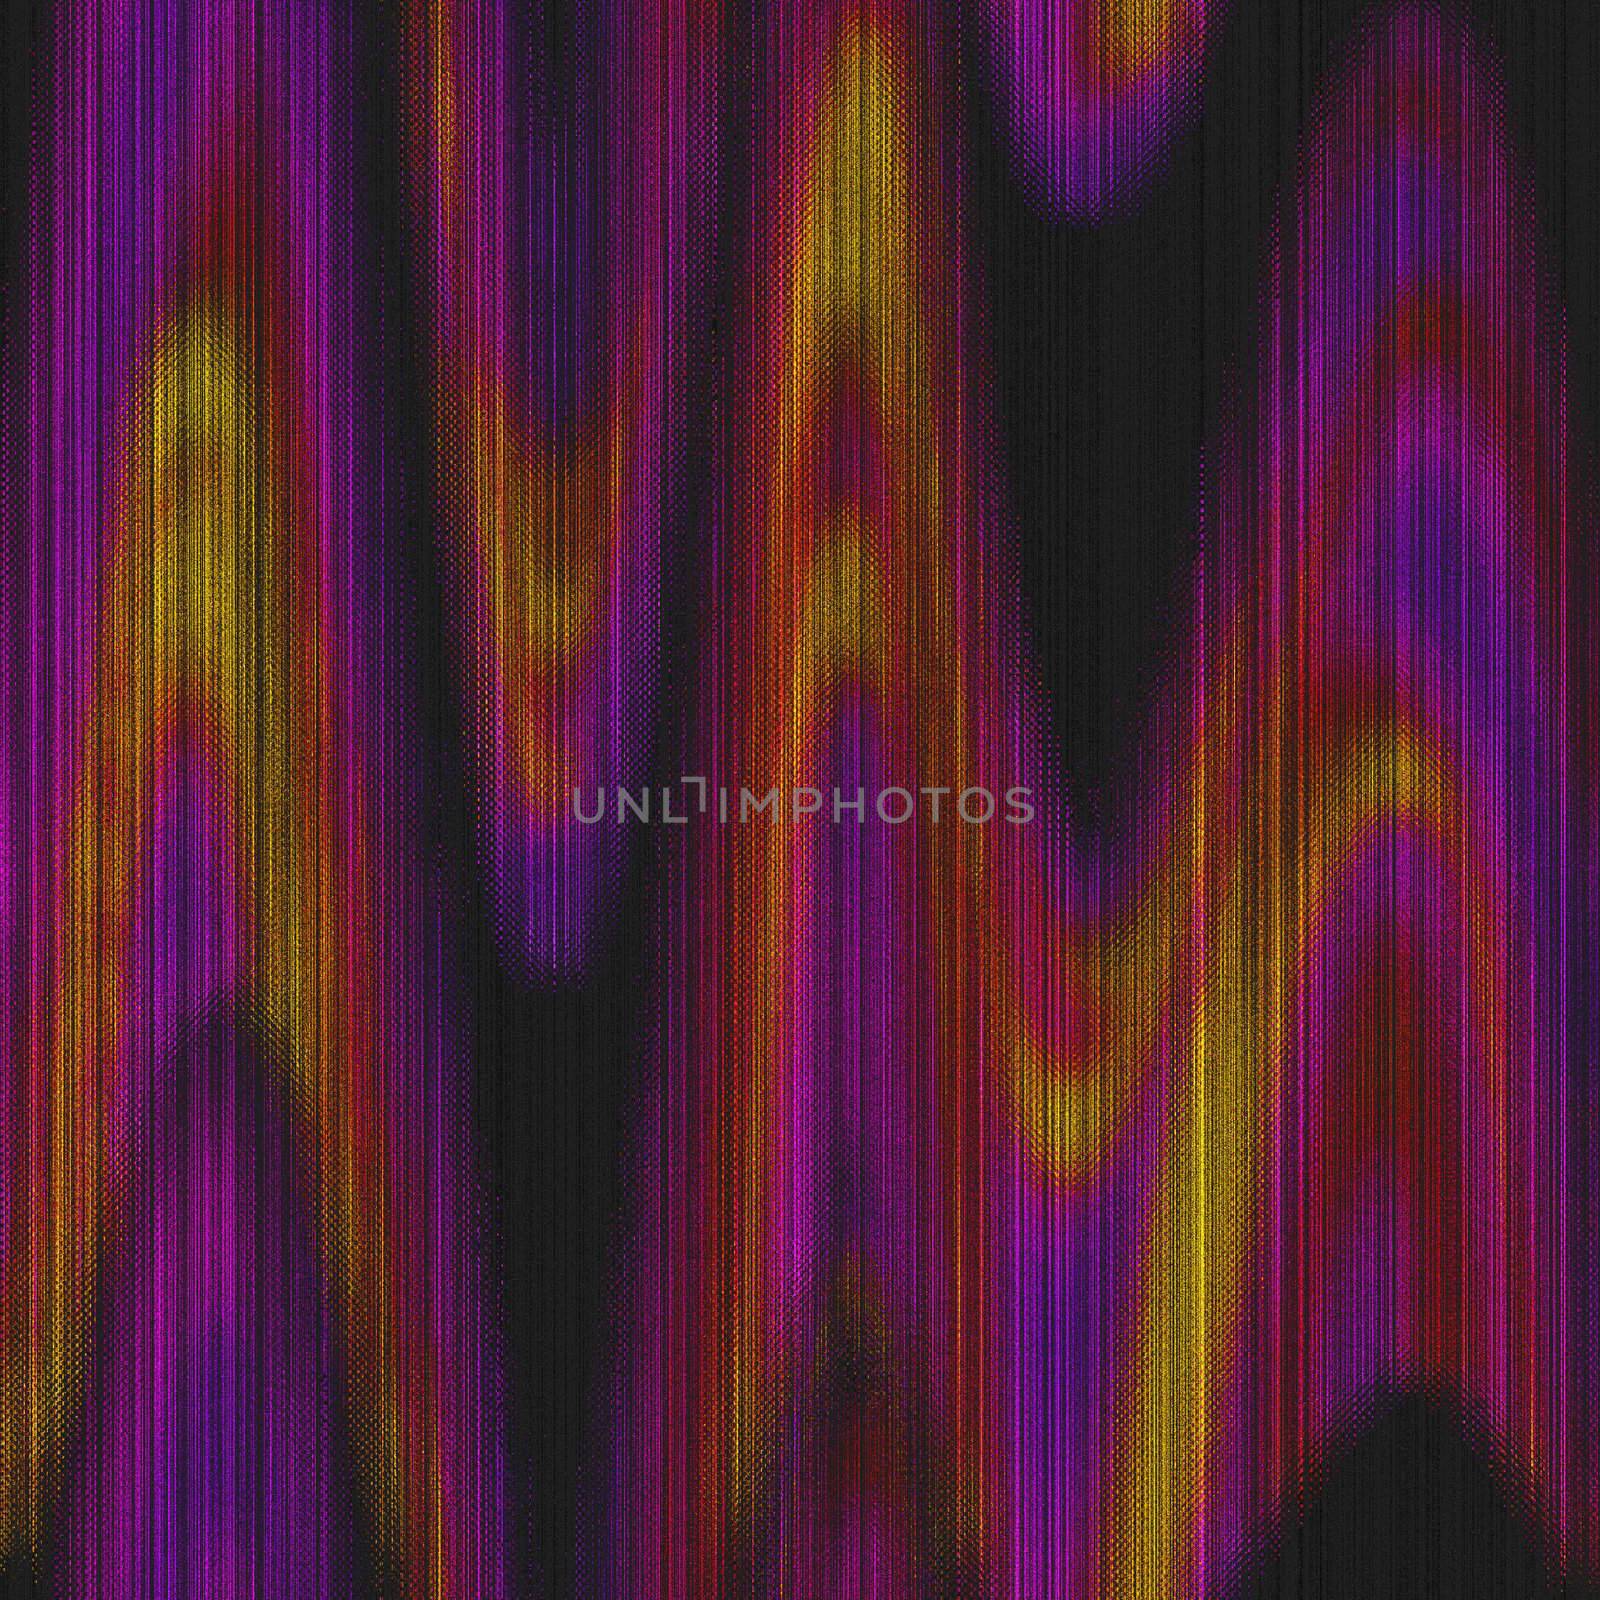 A purely digital interpretation of a handwoven silk twill fabric. It has the look of handdyed textiles using the ikat technique.